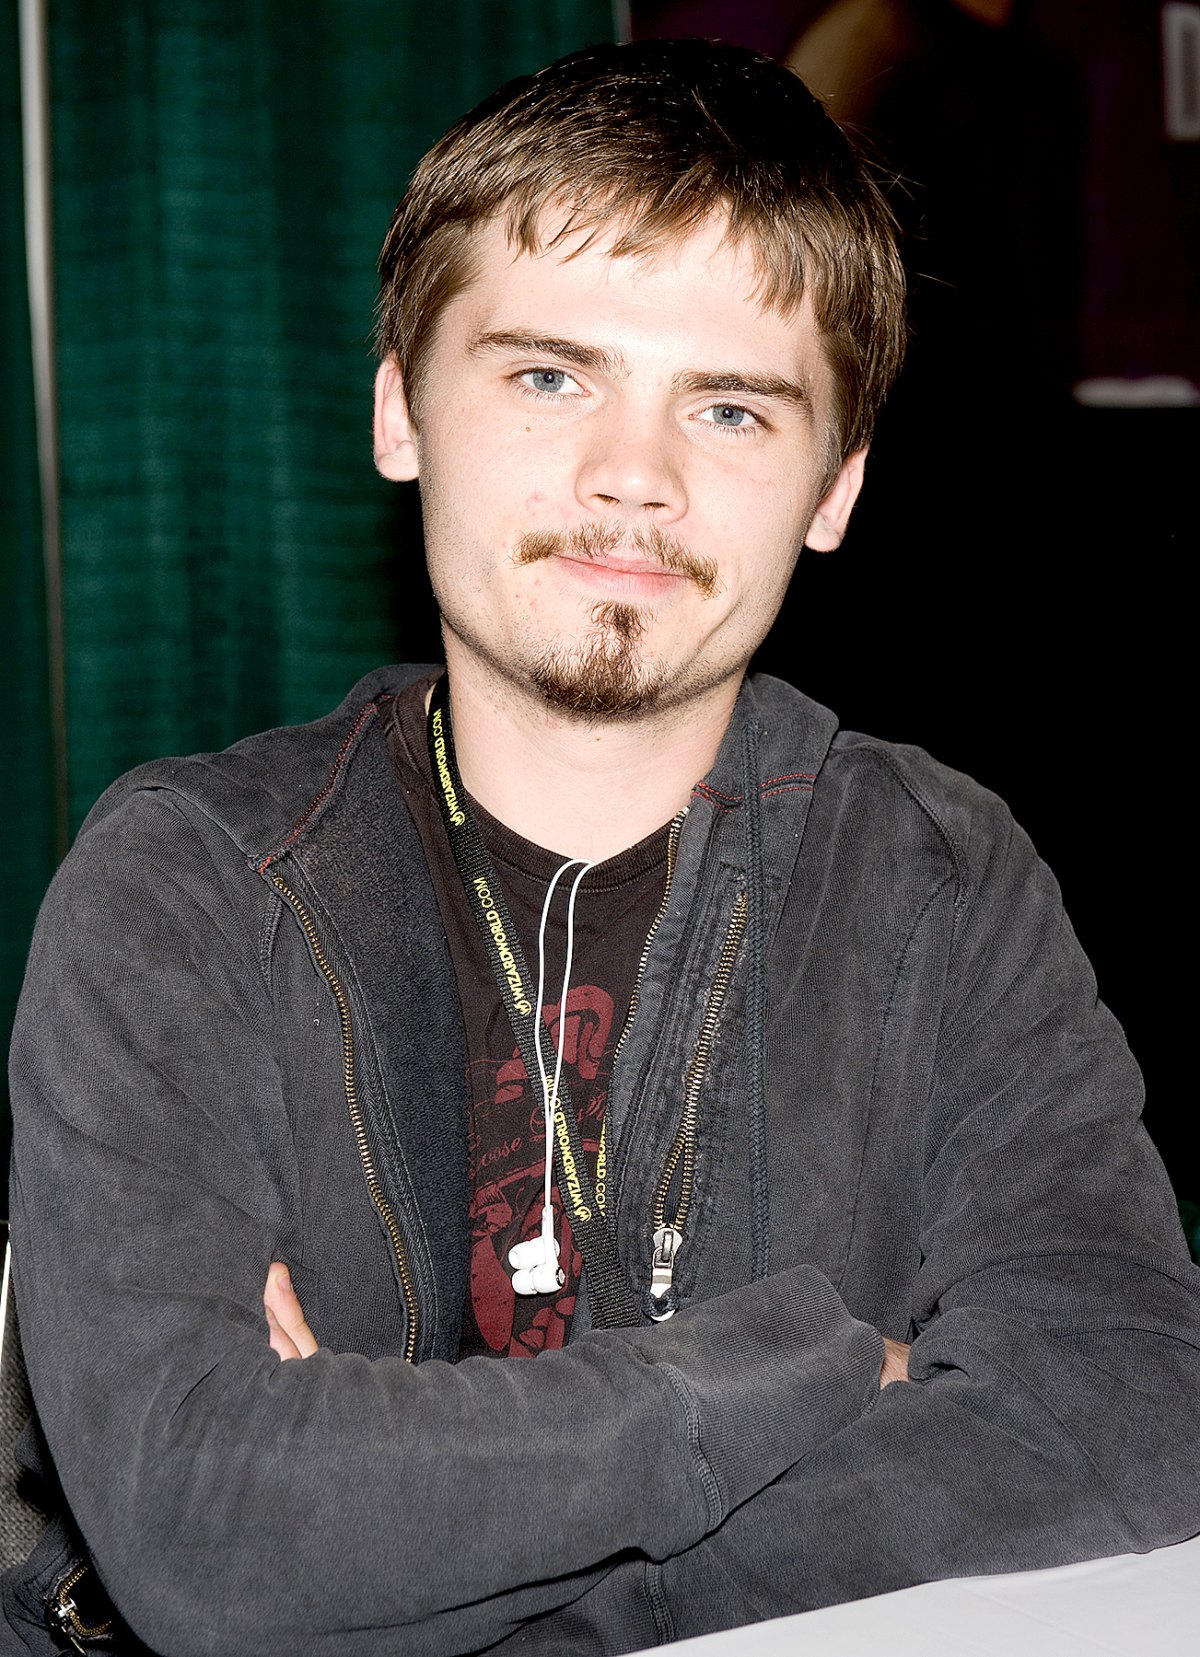 'Star Wars' Actor Jake Lloyd Diagnosed with Schizophrenia Report